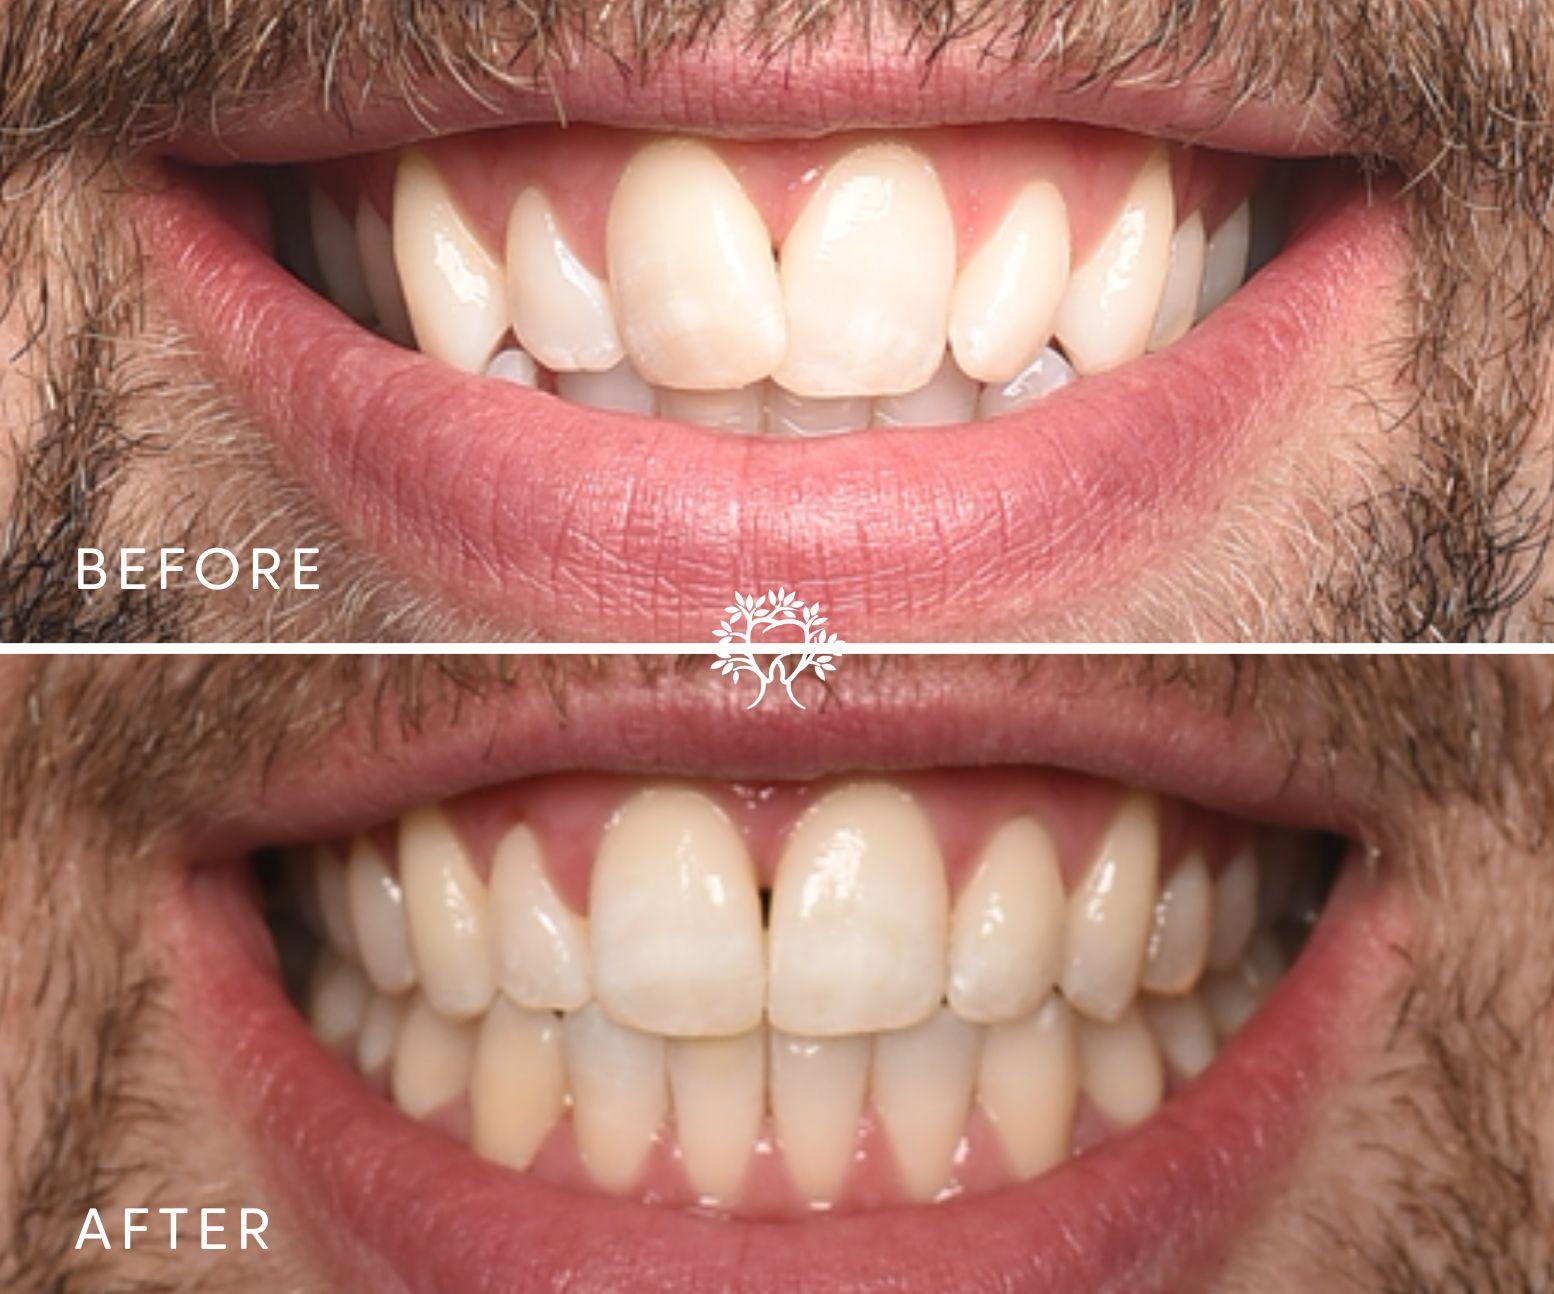 Images Taylor Street Dental: No.1 state-of-the-art Invisalign® | Cosmetic Dentist